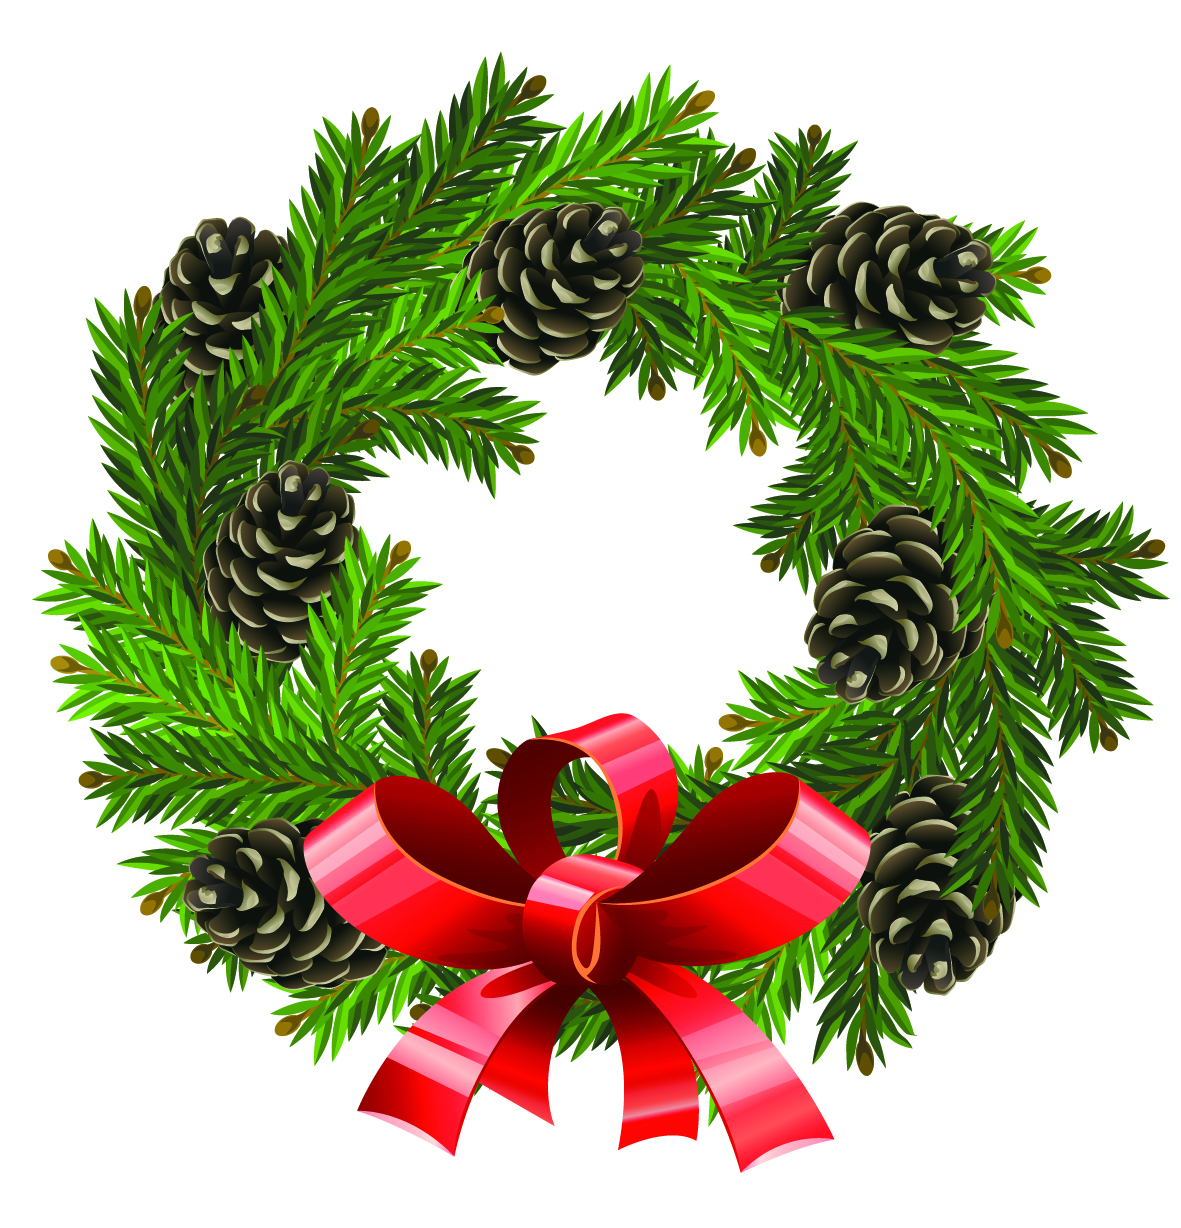 Free Christmas Wreaths Clipart, Download Free Clip Art, Free.